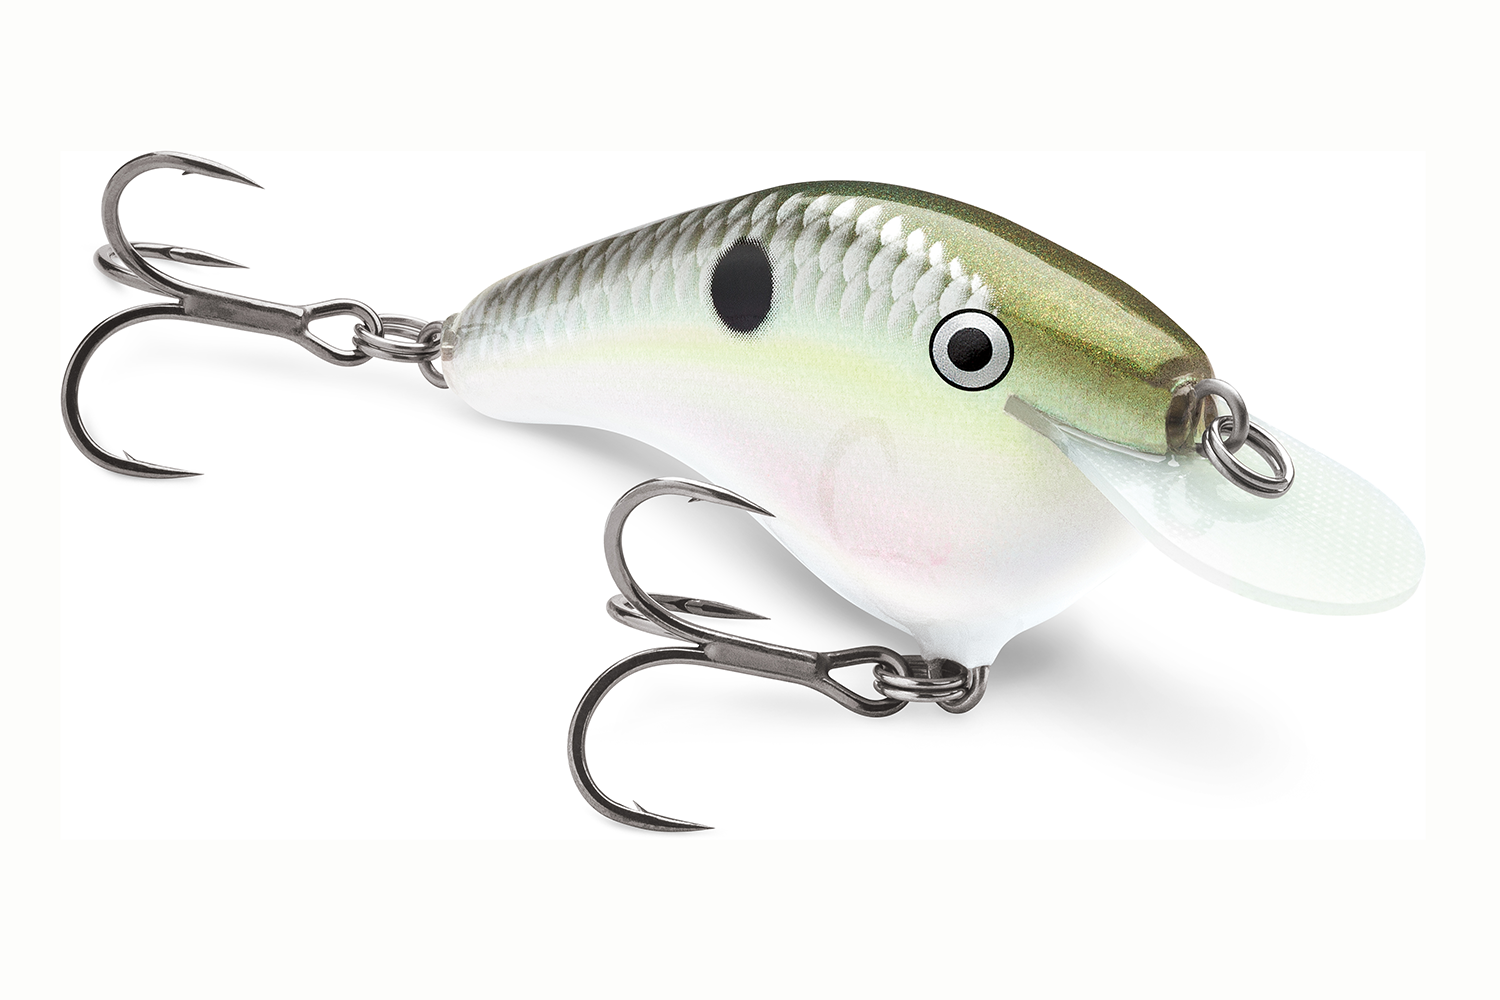 <p><b>Rapala OG 6 Slim </b></p>
<p>From a passion of bait building as a childhood hobby, to customizing lures as a professional angler, the OG Series is born of the sawdust from Ott DeFoeâs Garage. The Rapala Slim is a balsa, flat-sided bait with a medium wobble and tight side-to-side action. The lightweight circuit board lip is extremely thin yet delivers the right action and attitude no matter how you fish it. Weighs 1/2 oz, 2 3/4 inches long, dives to 6 feet, has a pair of No. 3 VMC Hybrid Trebles and comes in 14 colors. </p>
<p><a href=